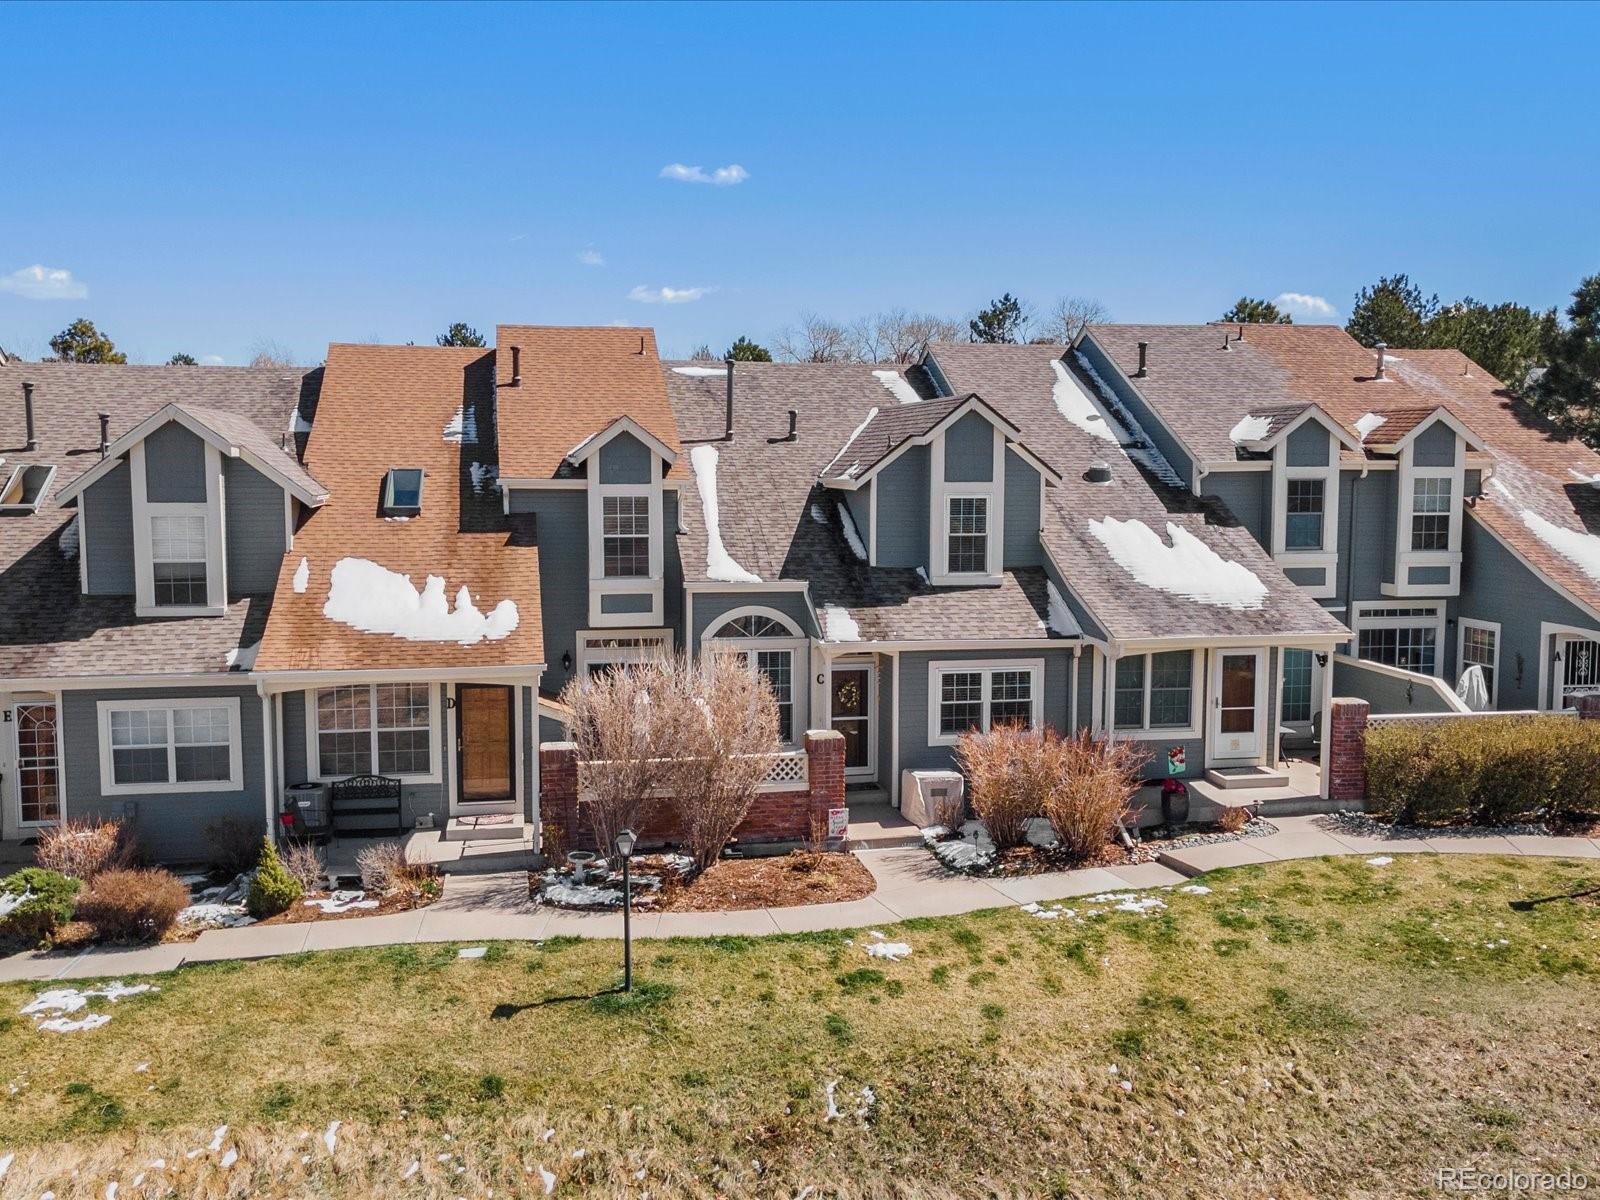 Report Image for 2962 W Long Drive,Littleton, Colorado